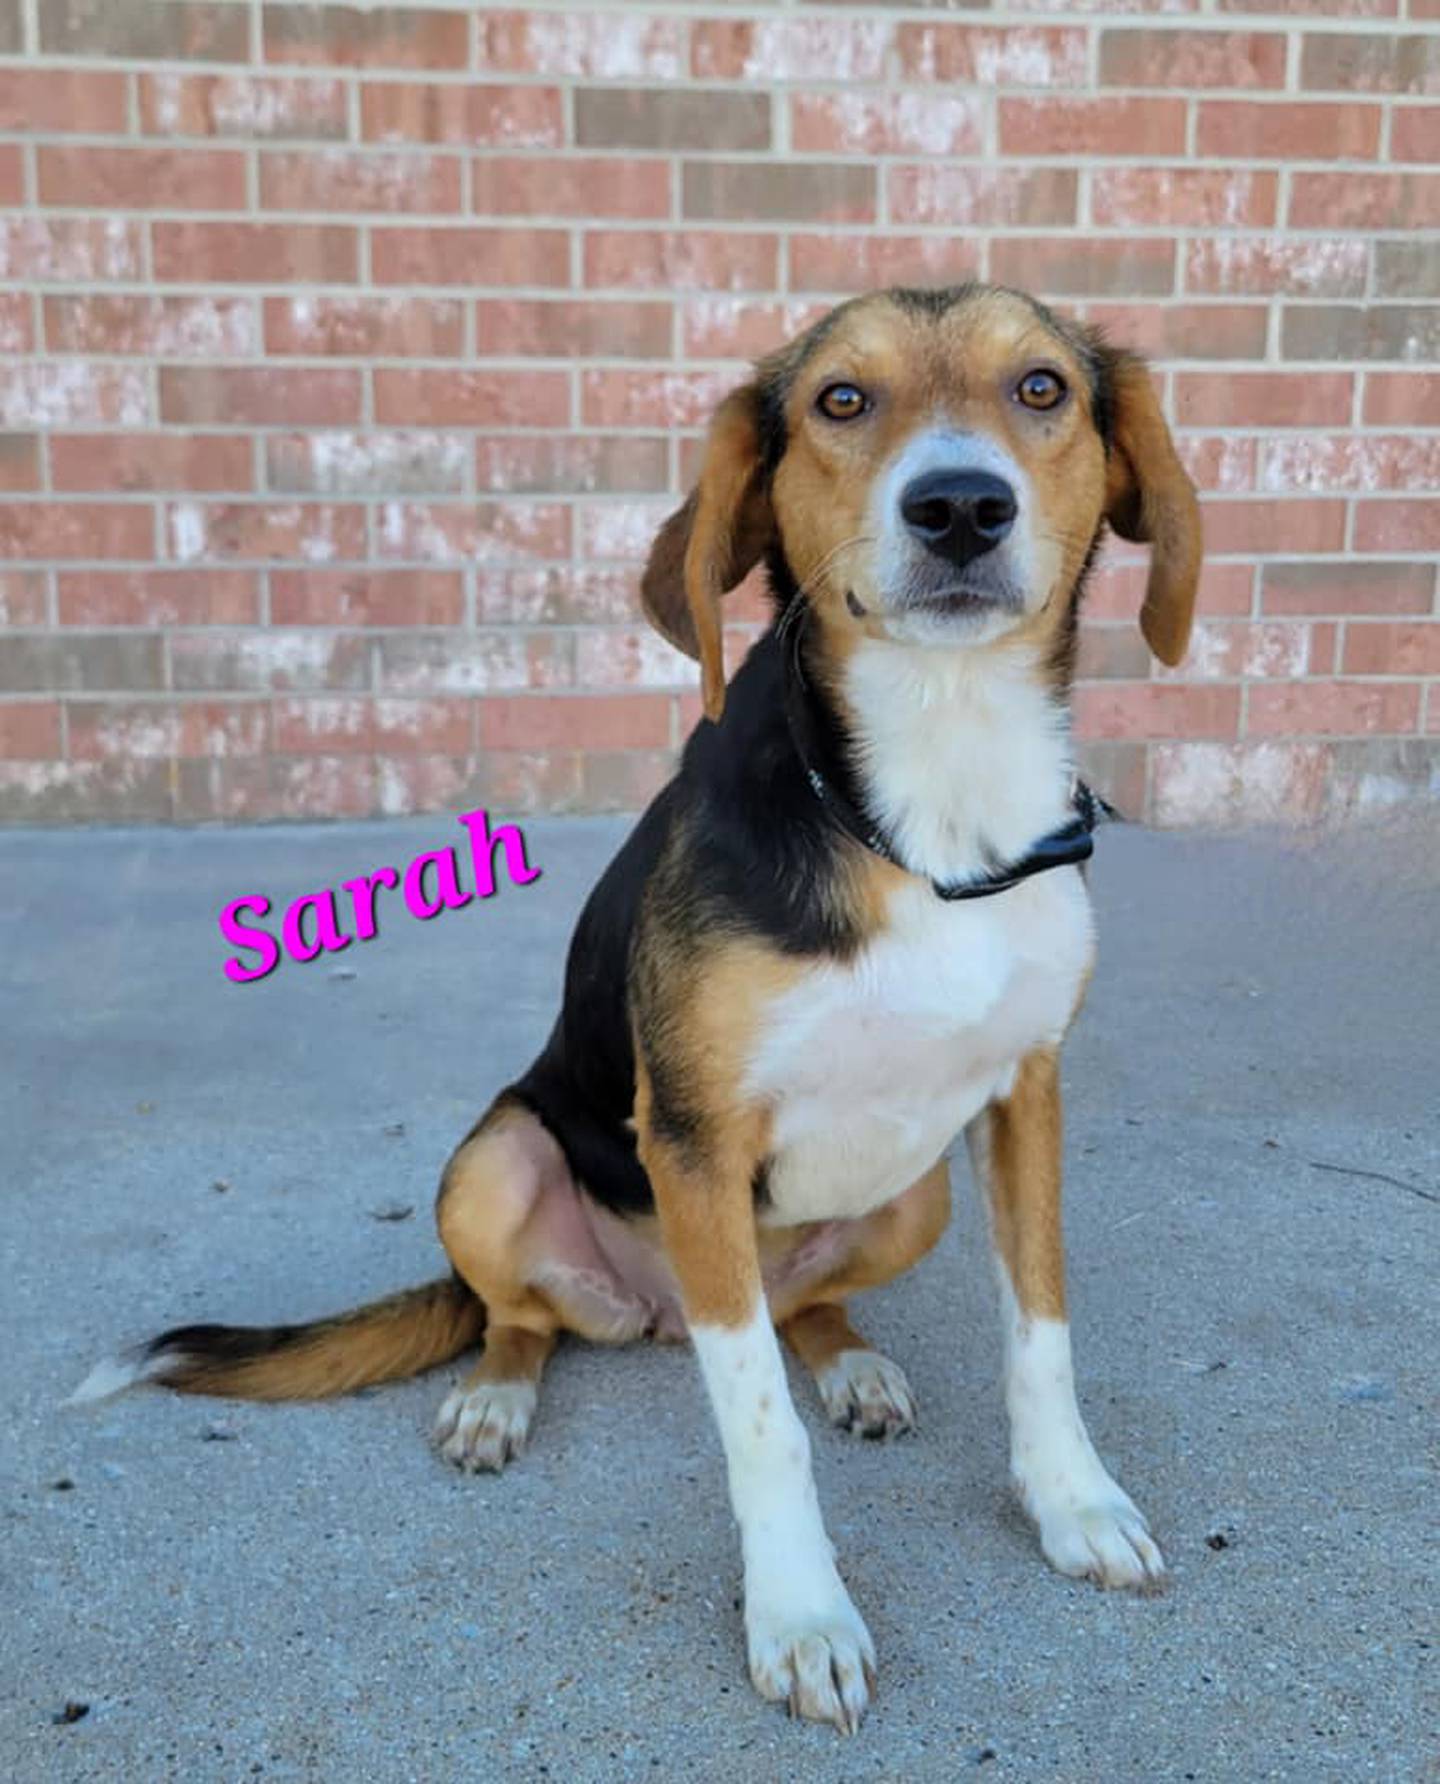 Sarah and Slinky are sweet 1-year-old, 30-pound beagle mixes and a bonded pair so they should be adopted together. Sarah and Slinky are calm in their kennel. They are shy with new experiences but warm up quickly and love to snuggle. To meet Sarah and Slinky, contact Hopeful Tails Animal Rescue at hopefultailsadoptions@outlook.com. Visit hopefultailsanimalrescue.org.